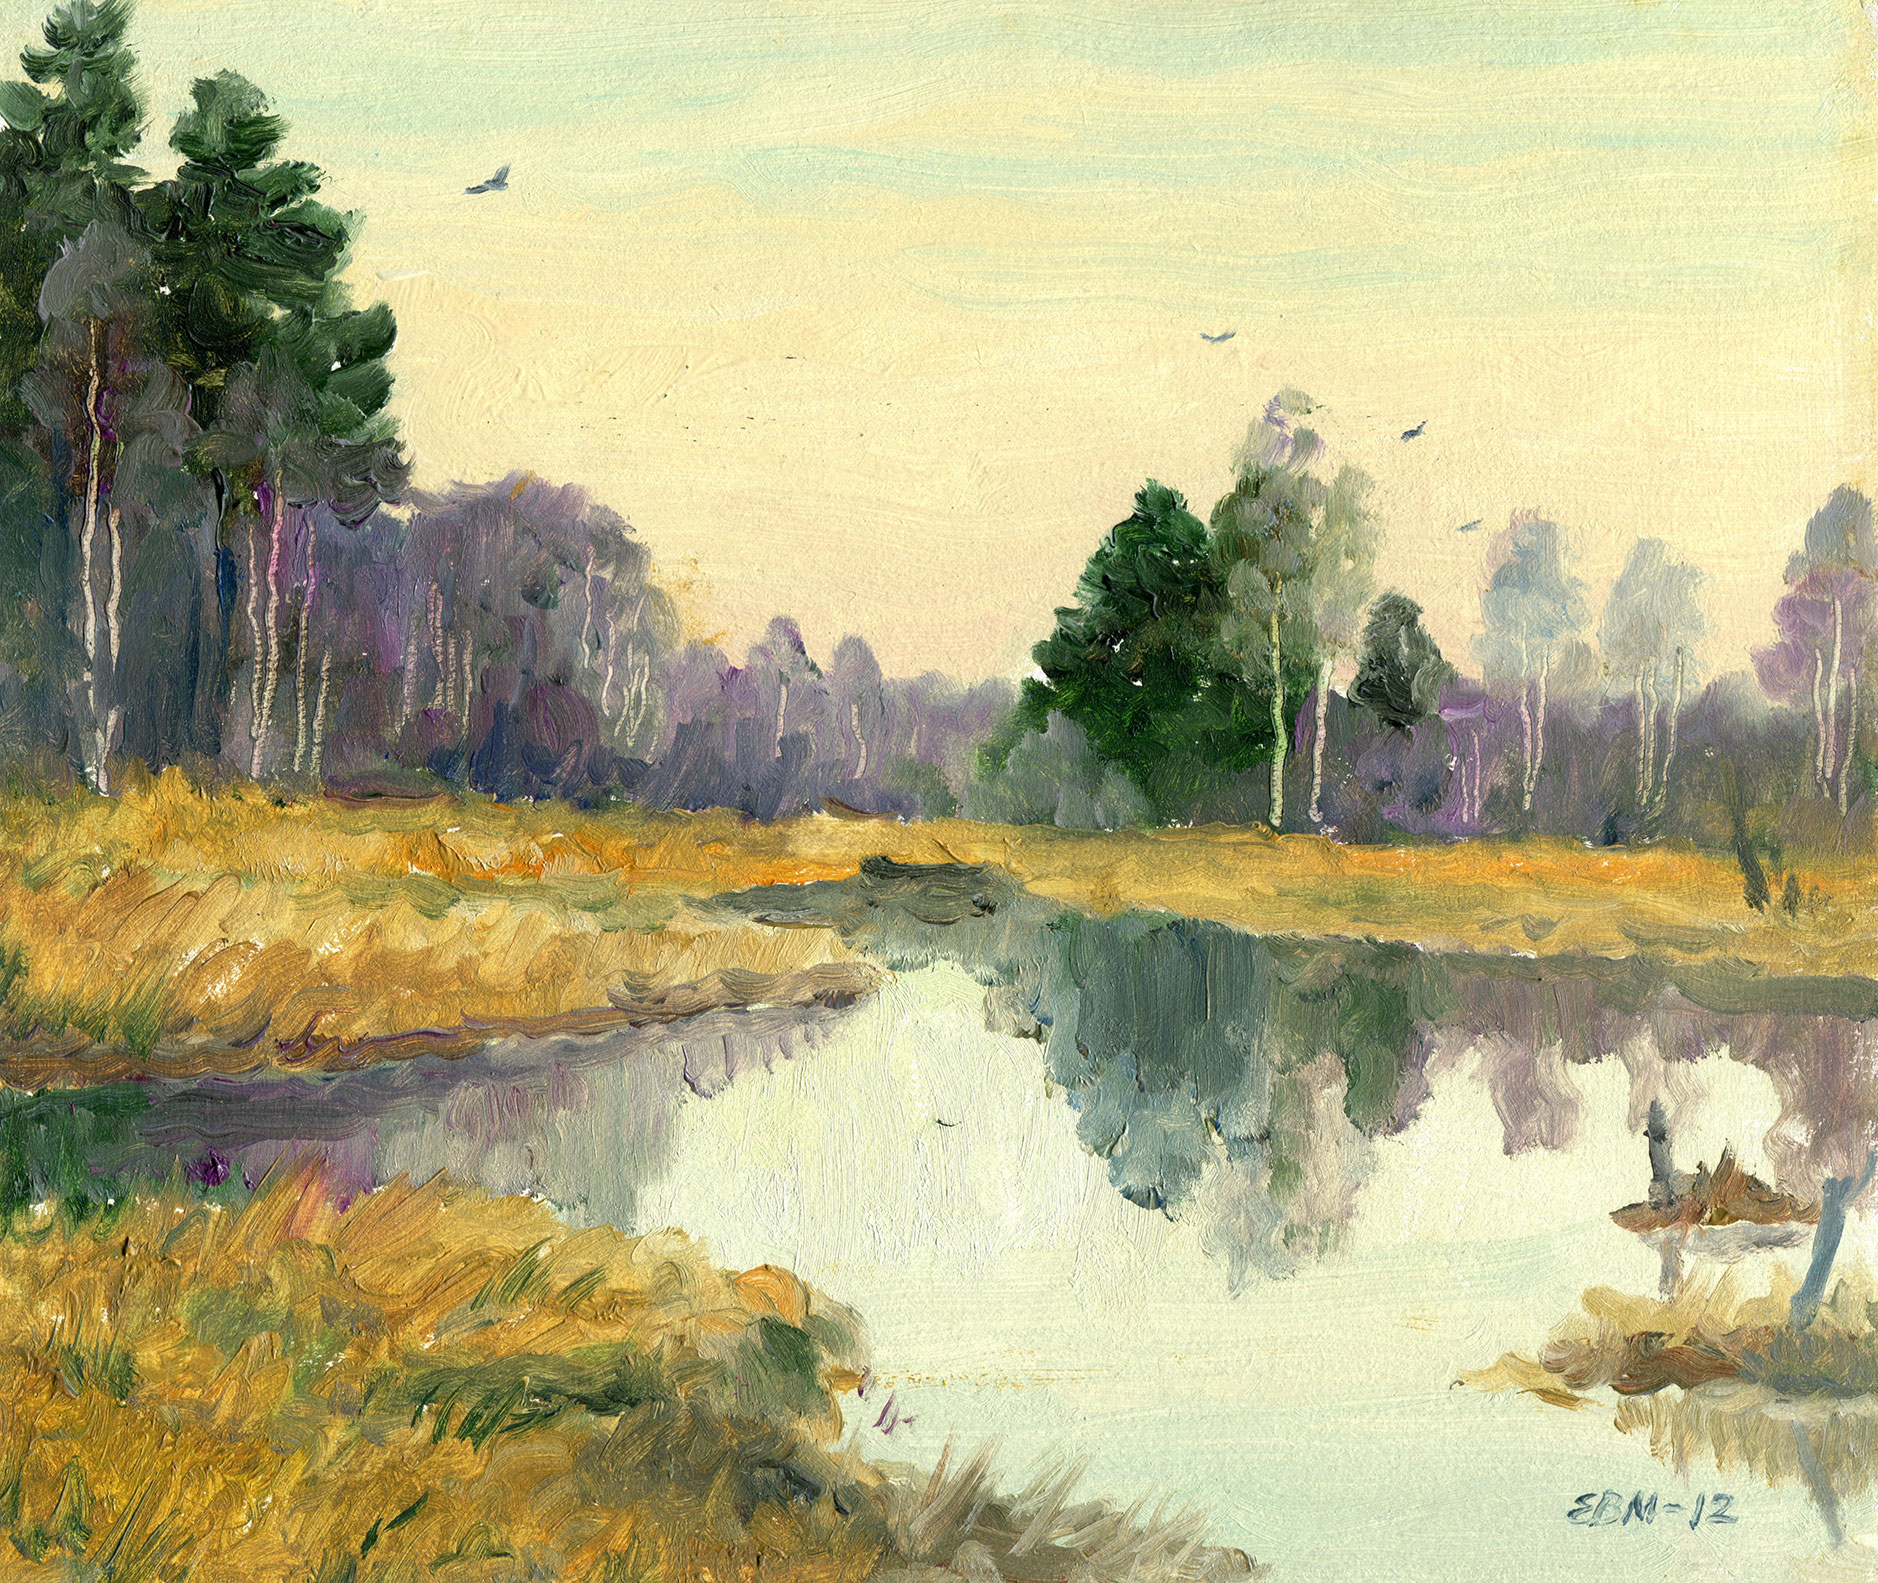  Verkhoturye. On the other Side of the River - 1, Valentin Efremov, Buy the painting Oil